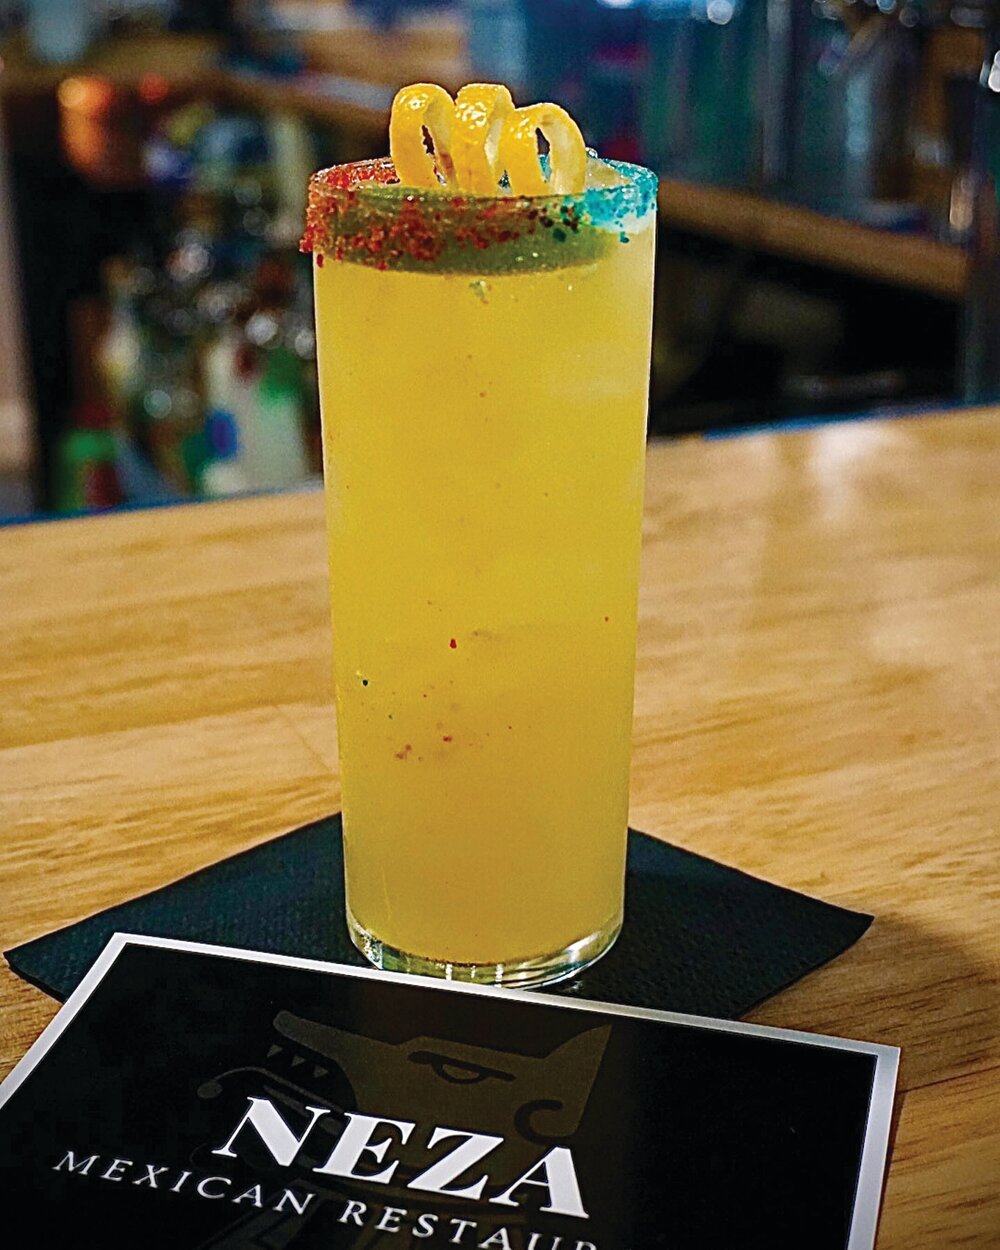 Neza offers authentic Mexican food and delicious cocktails including the Perro Salado "Salty Dog."